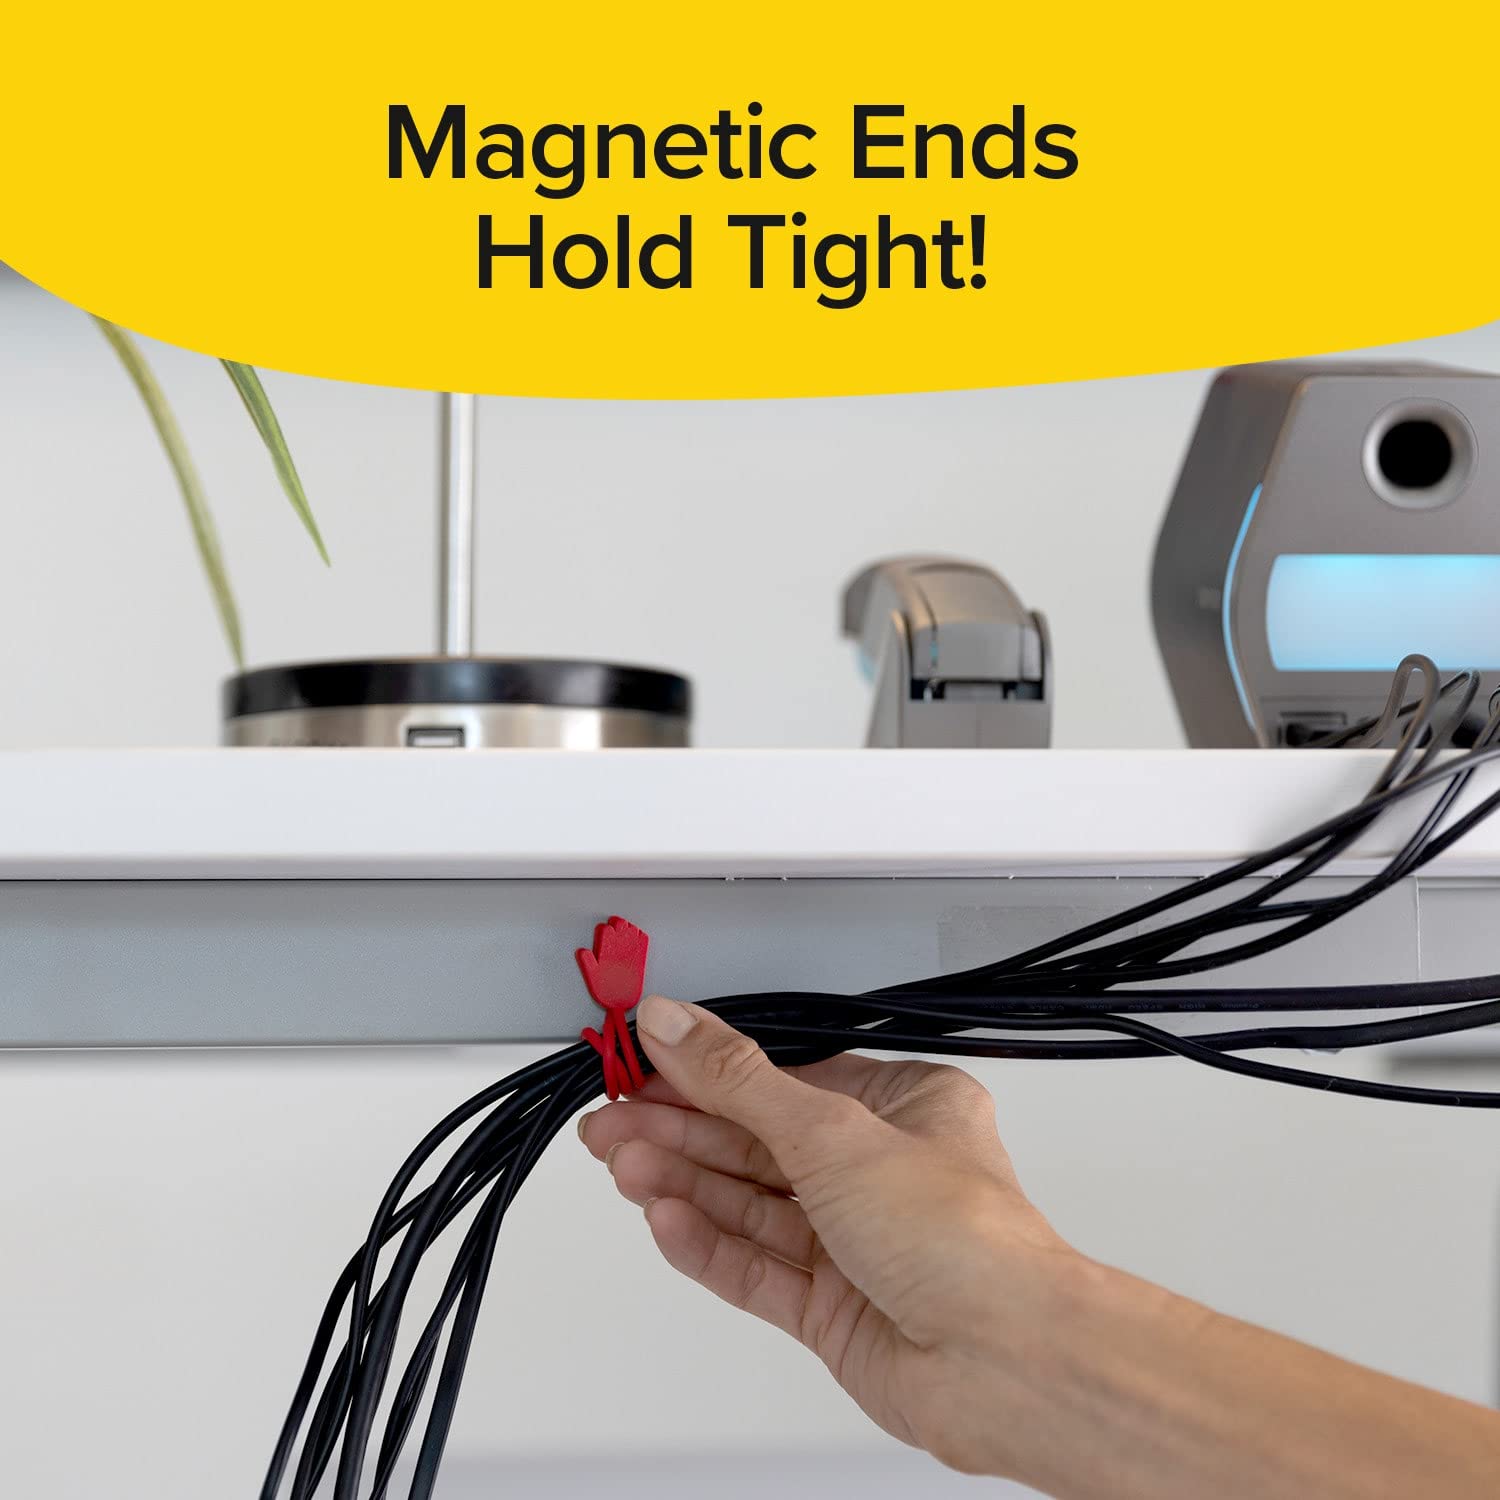 Ruby Holding Hands Ultra-Powerful Magnetic Silicone Zip Ties, AS-SEEN-ON-TV, Industrial-Strength Cable Ties with Magnet Automatically Stick Together, Reusable, Great for Cables, Cords